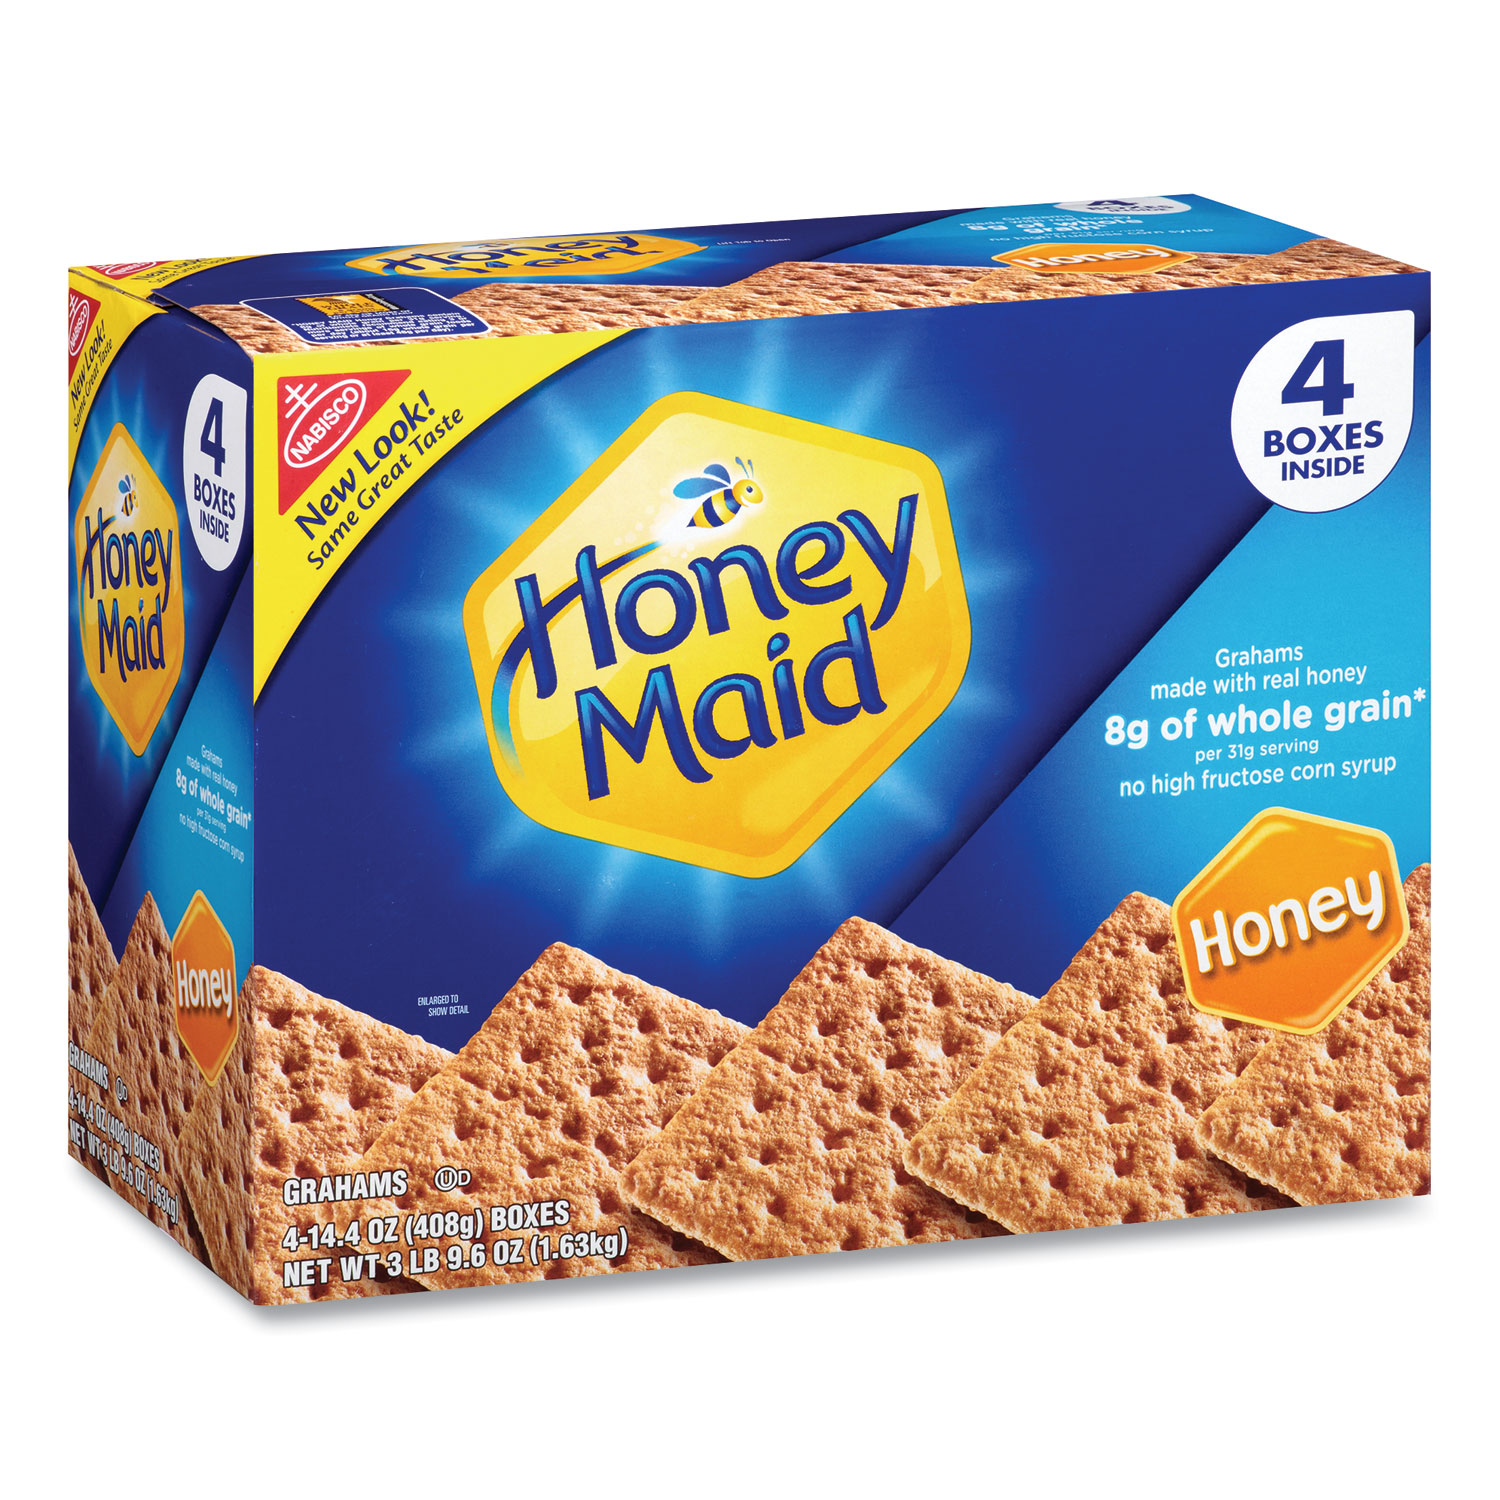 Nabisco® Honey Maid Honey Grahams, 14.4 oz Box, 4 Boxes/Pack, Free Delivery in 1-4 Business Days